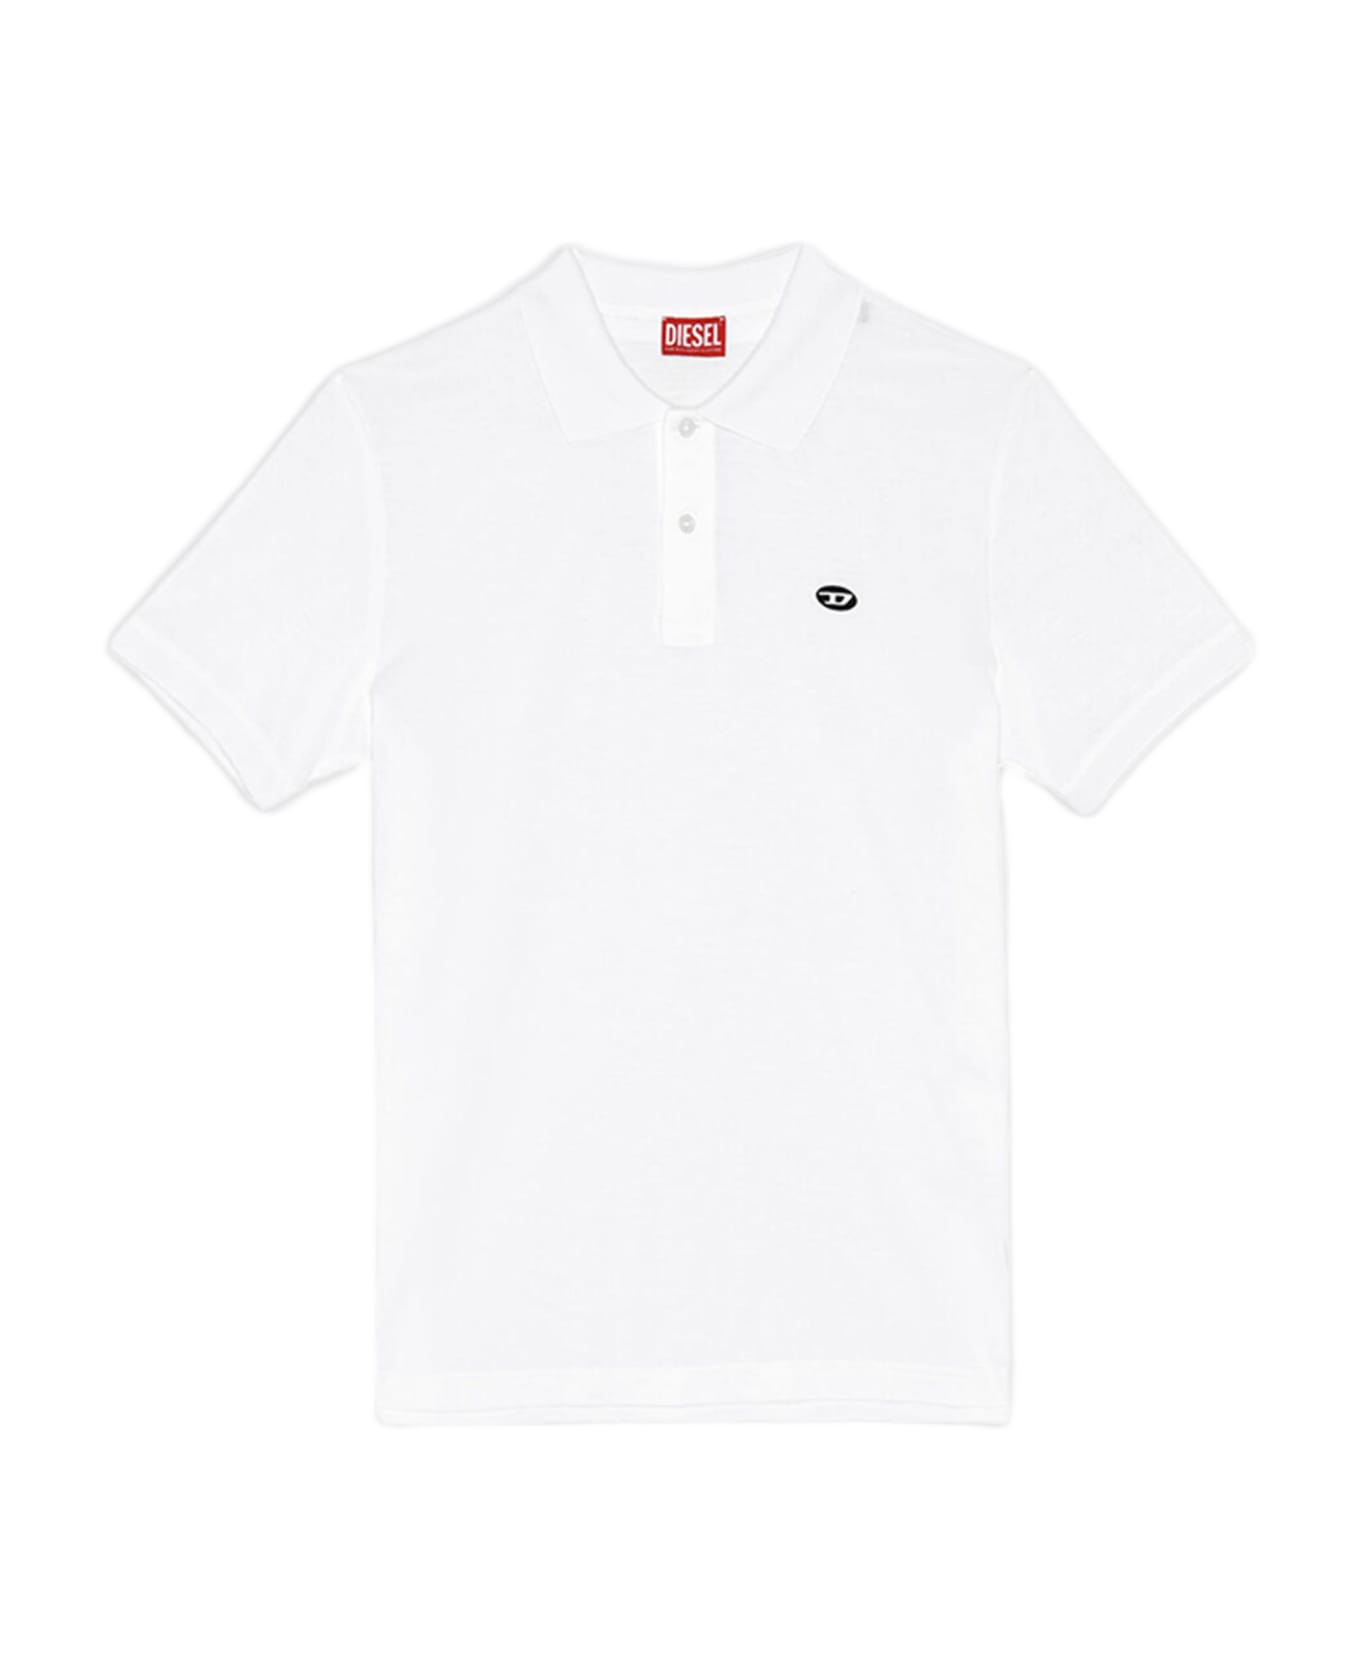 Diesel T-smith-doval-pj White Polo Shirt With Oval D Logo Patch - T Smith Doval Pj - Bianco ポロシャツ